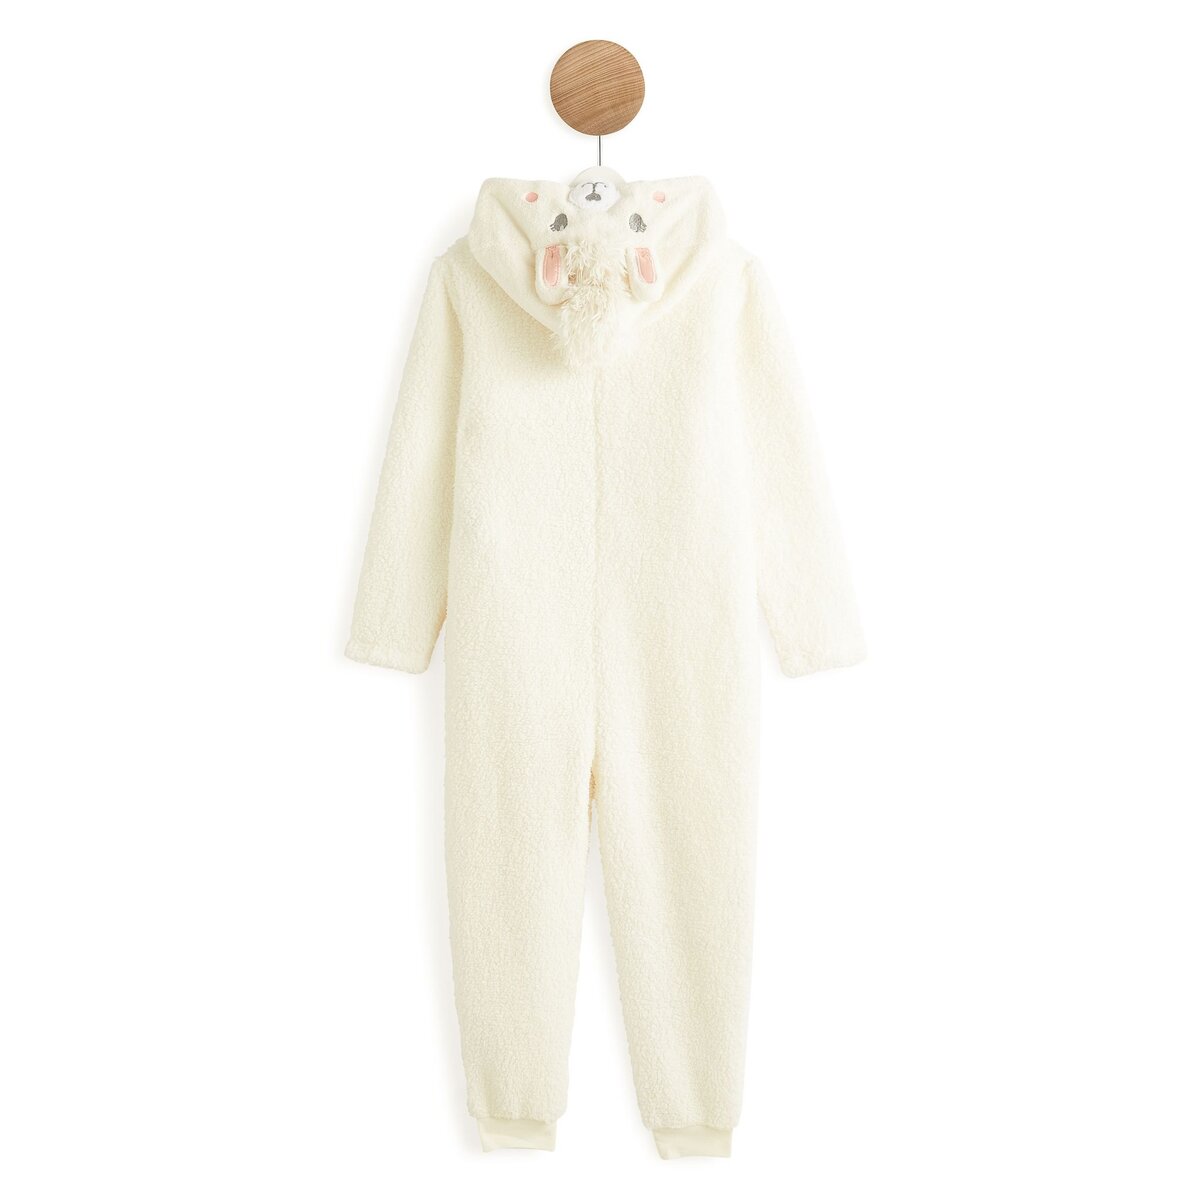 IN EXTENSO Combinaison peluche lapin fille